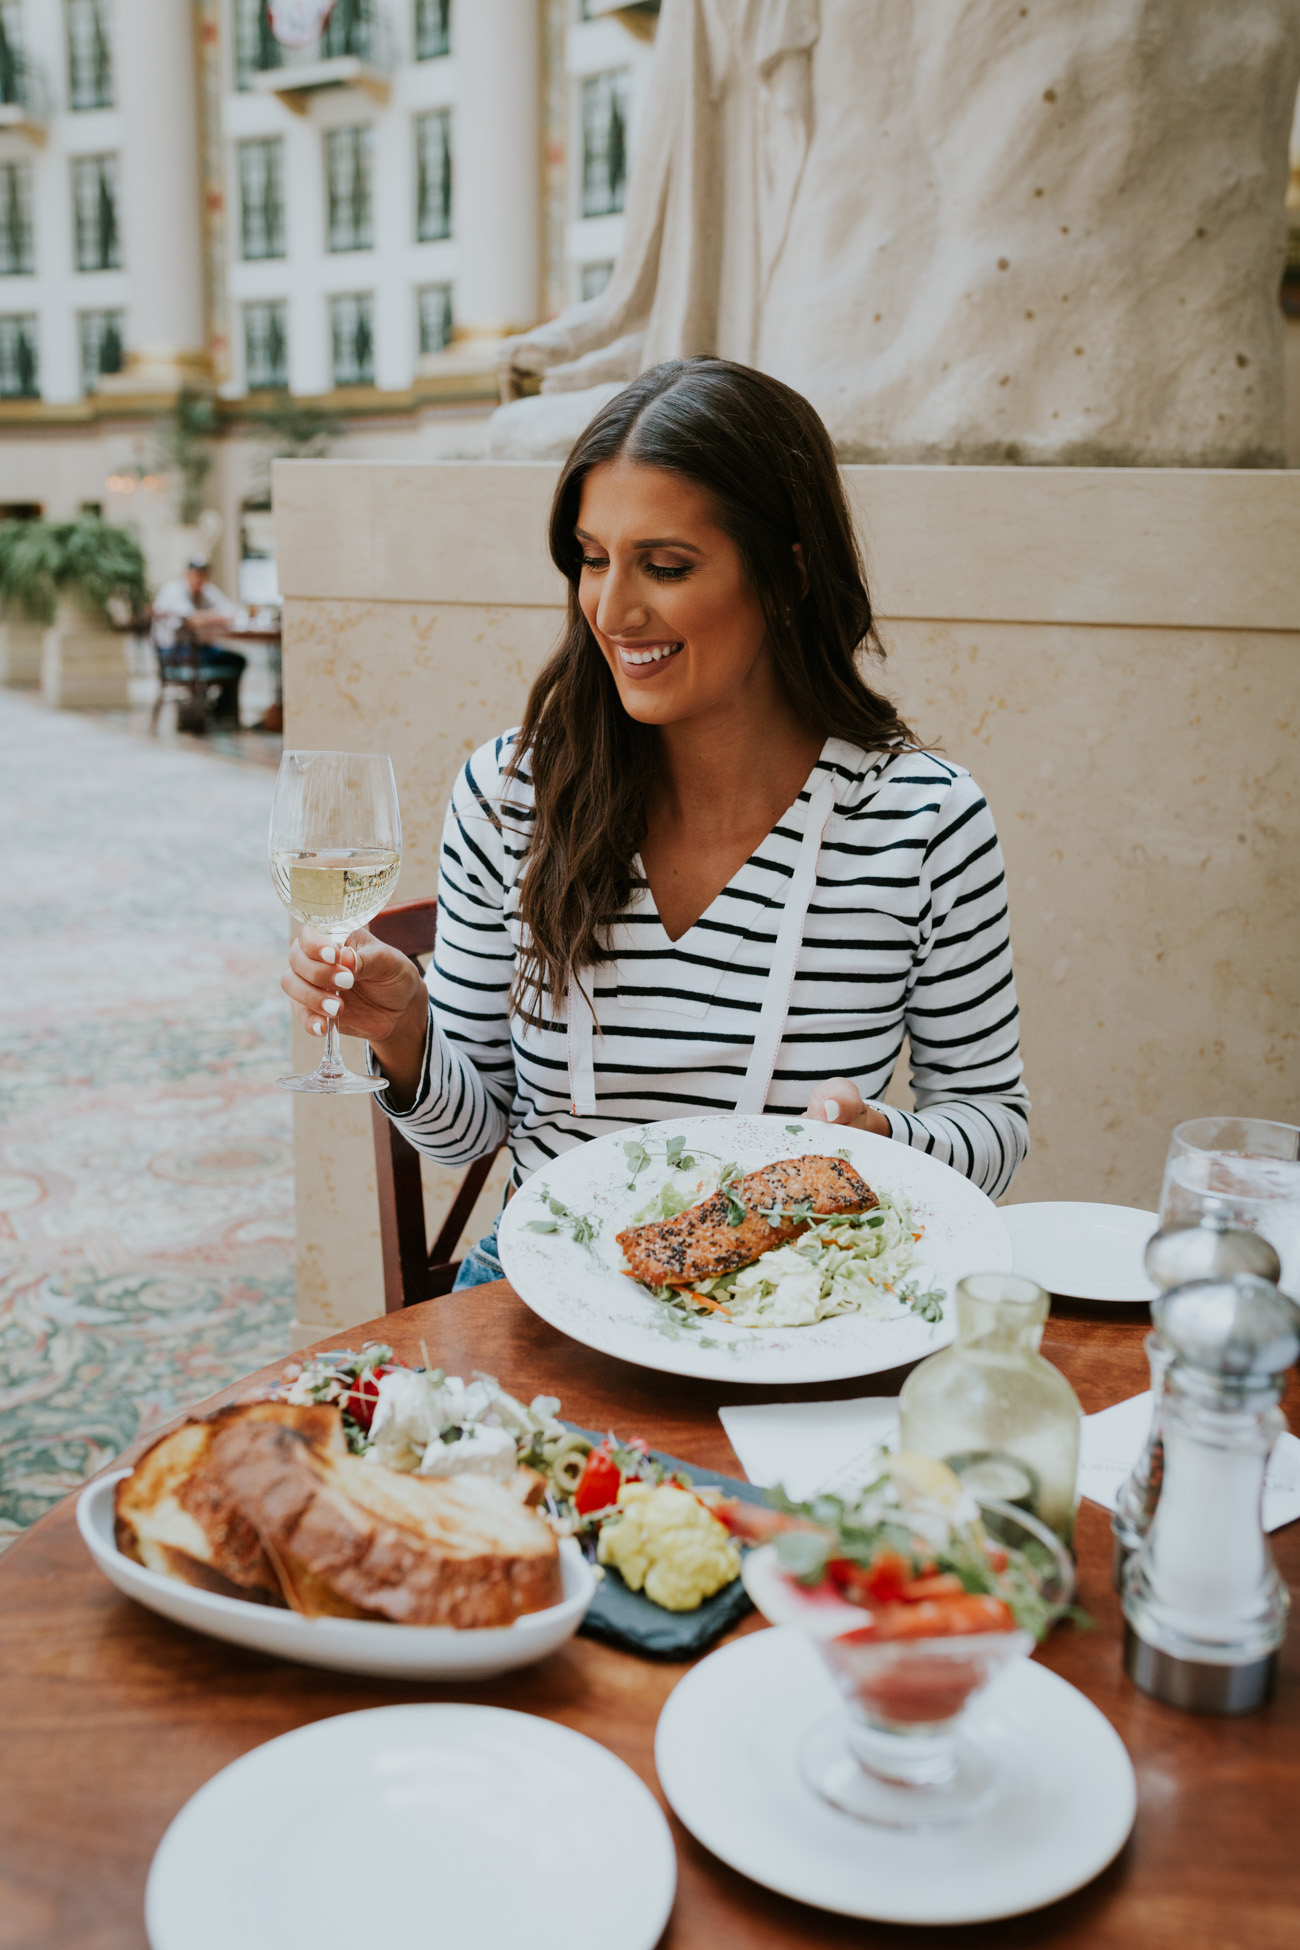 indiana weekend getaway, french lick resort and casino, french lick indiana, west baden indiana, west baden springs hotel, french lick spa, french lick golf course, kentucky weekend getaway, bed and breakfast // grace wainwright a southern drawl